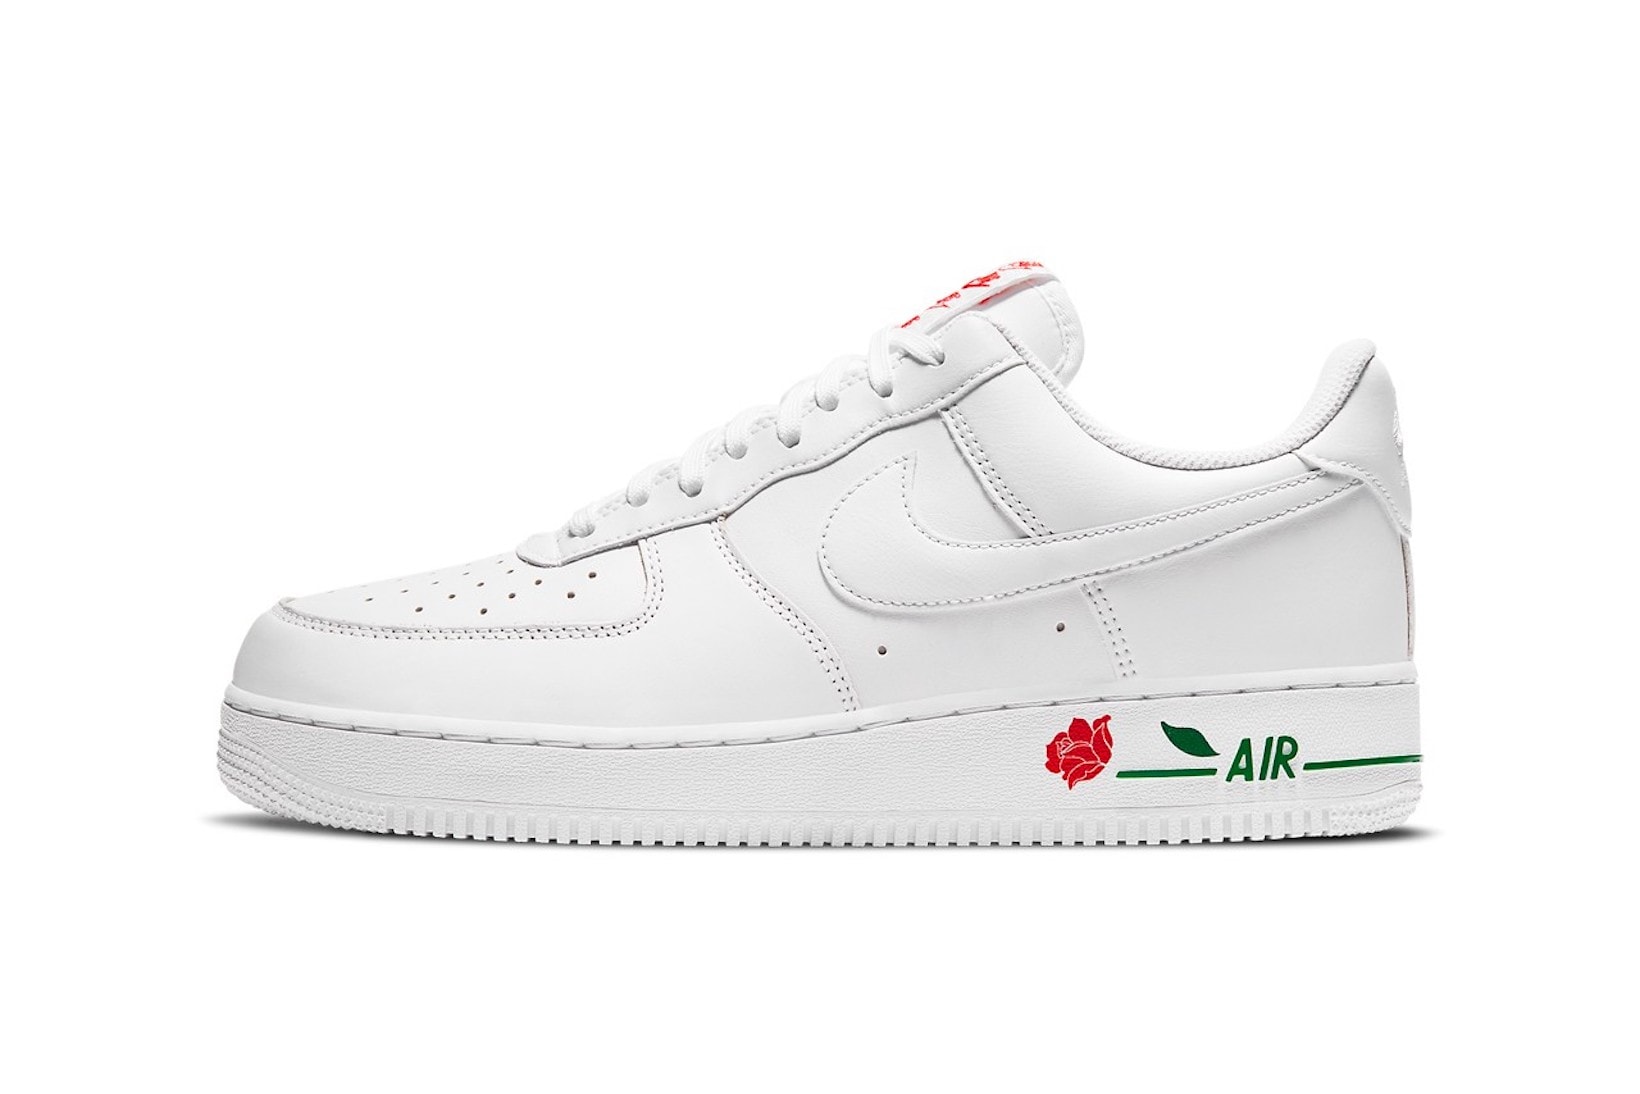 nike air force 1 af1 low white bag new york city bodegas sneakers footwear shoes sneakerhead lateral